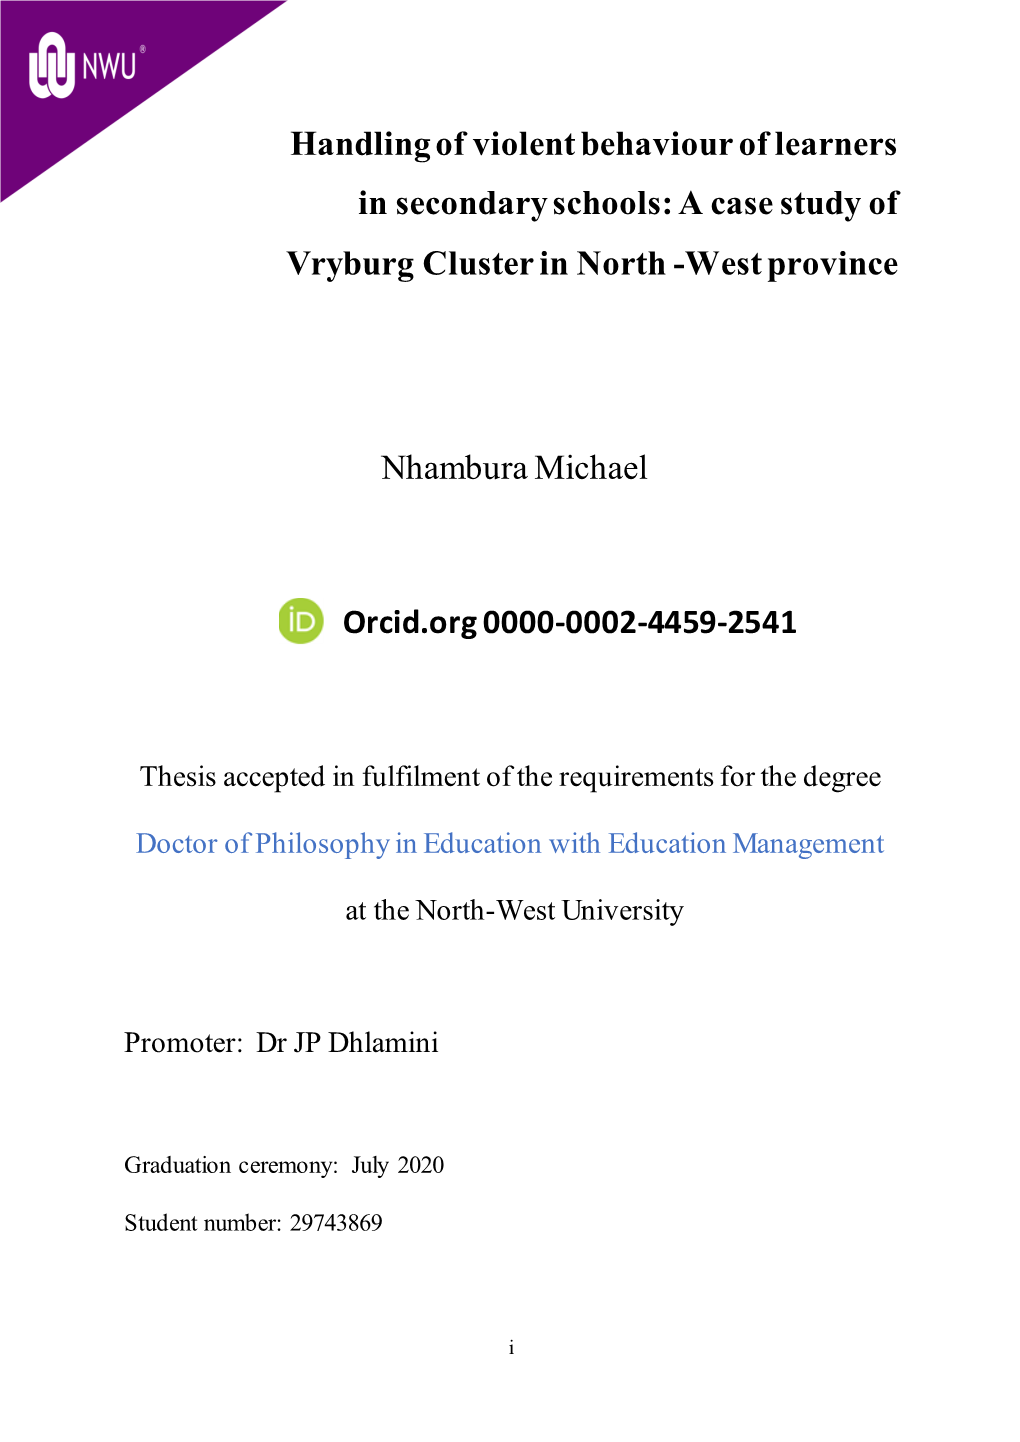 Handling of Violent Behaviour of Learners in Secondary Schools: a Case Study of Vryburg Cluster in North -West Province